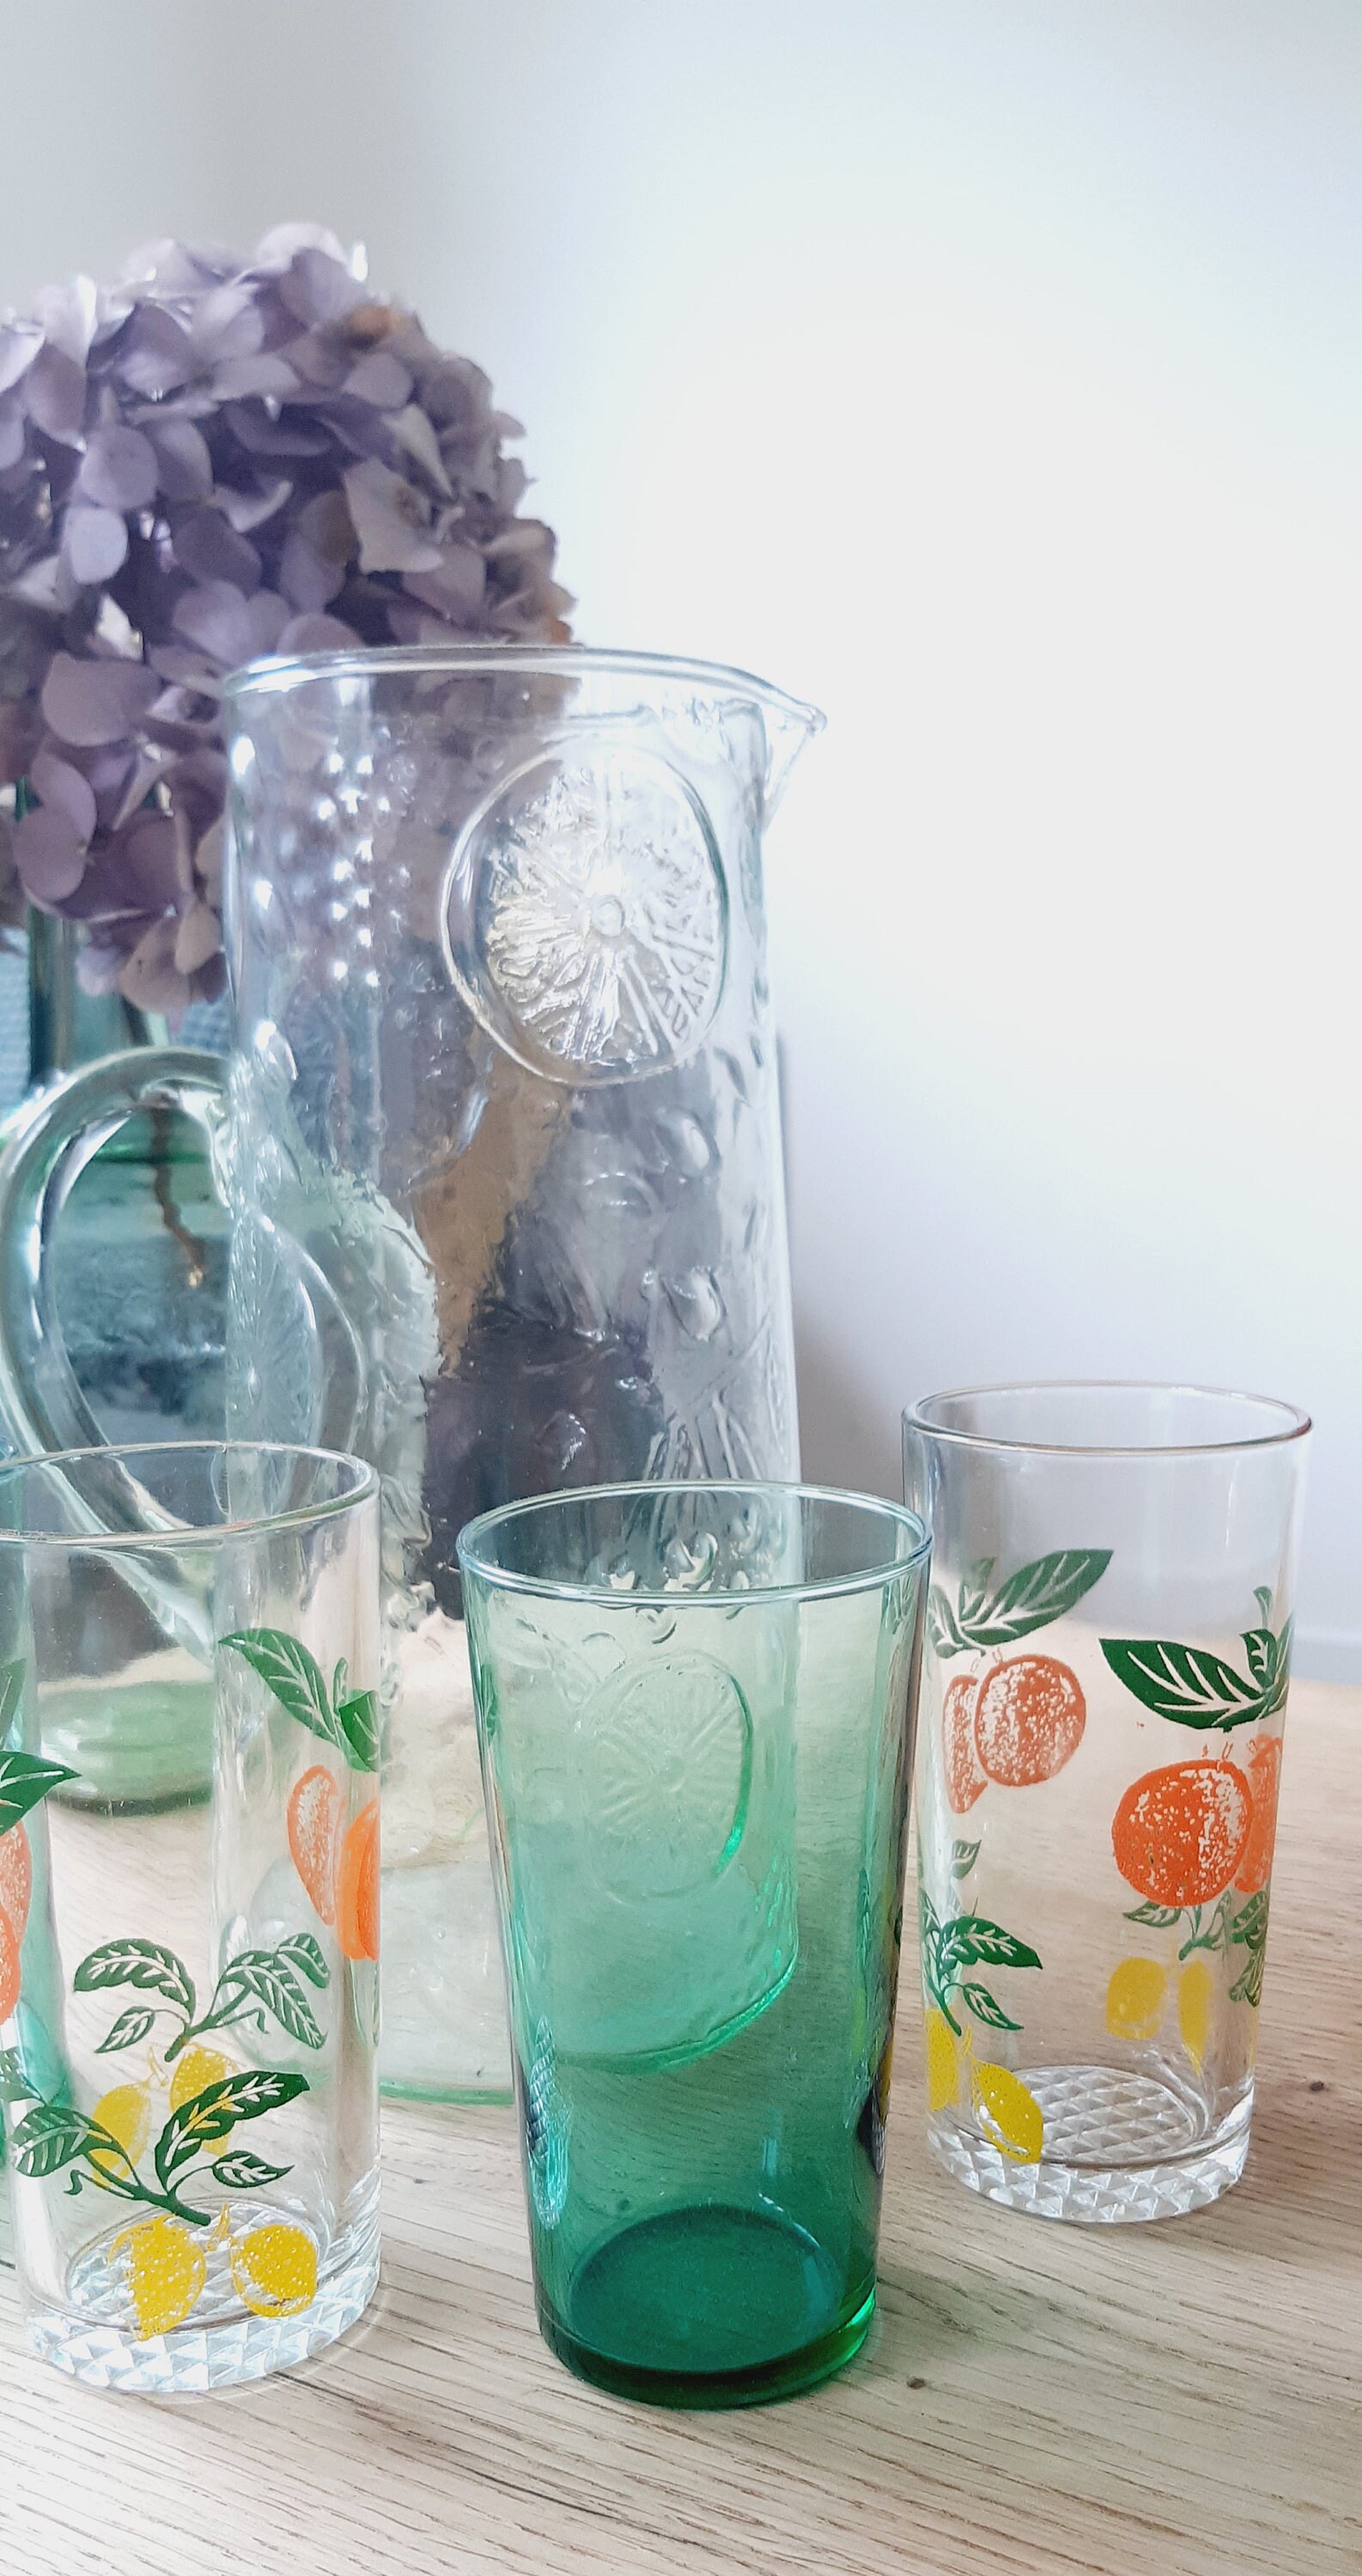 Glass Pitcher of Lemonade by Andee Design